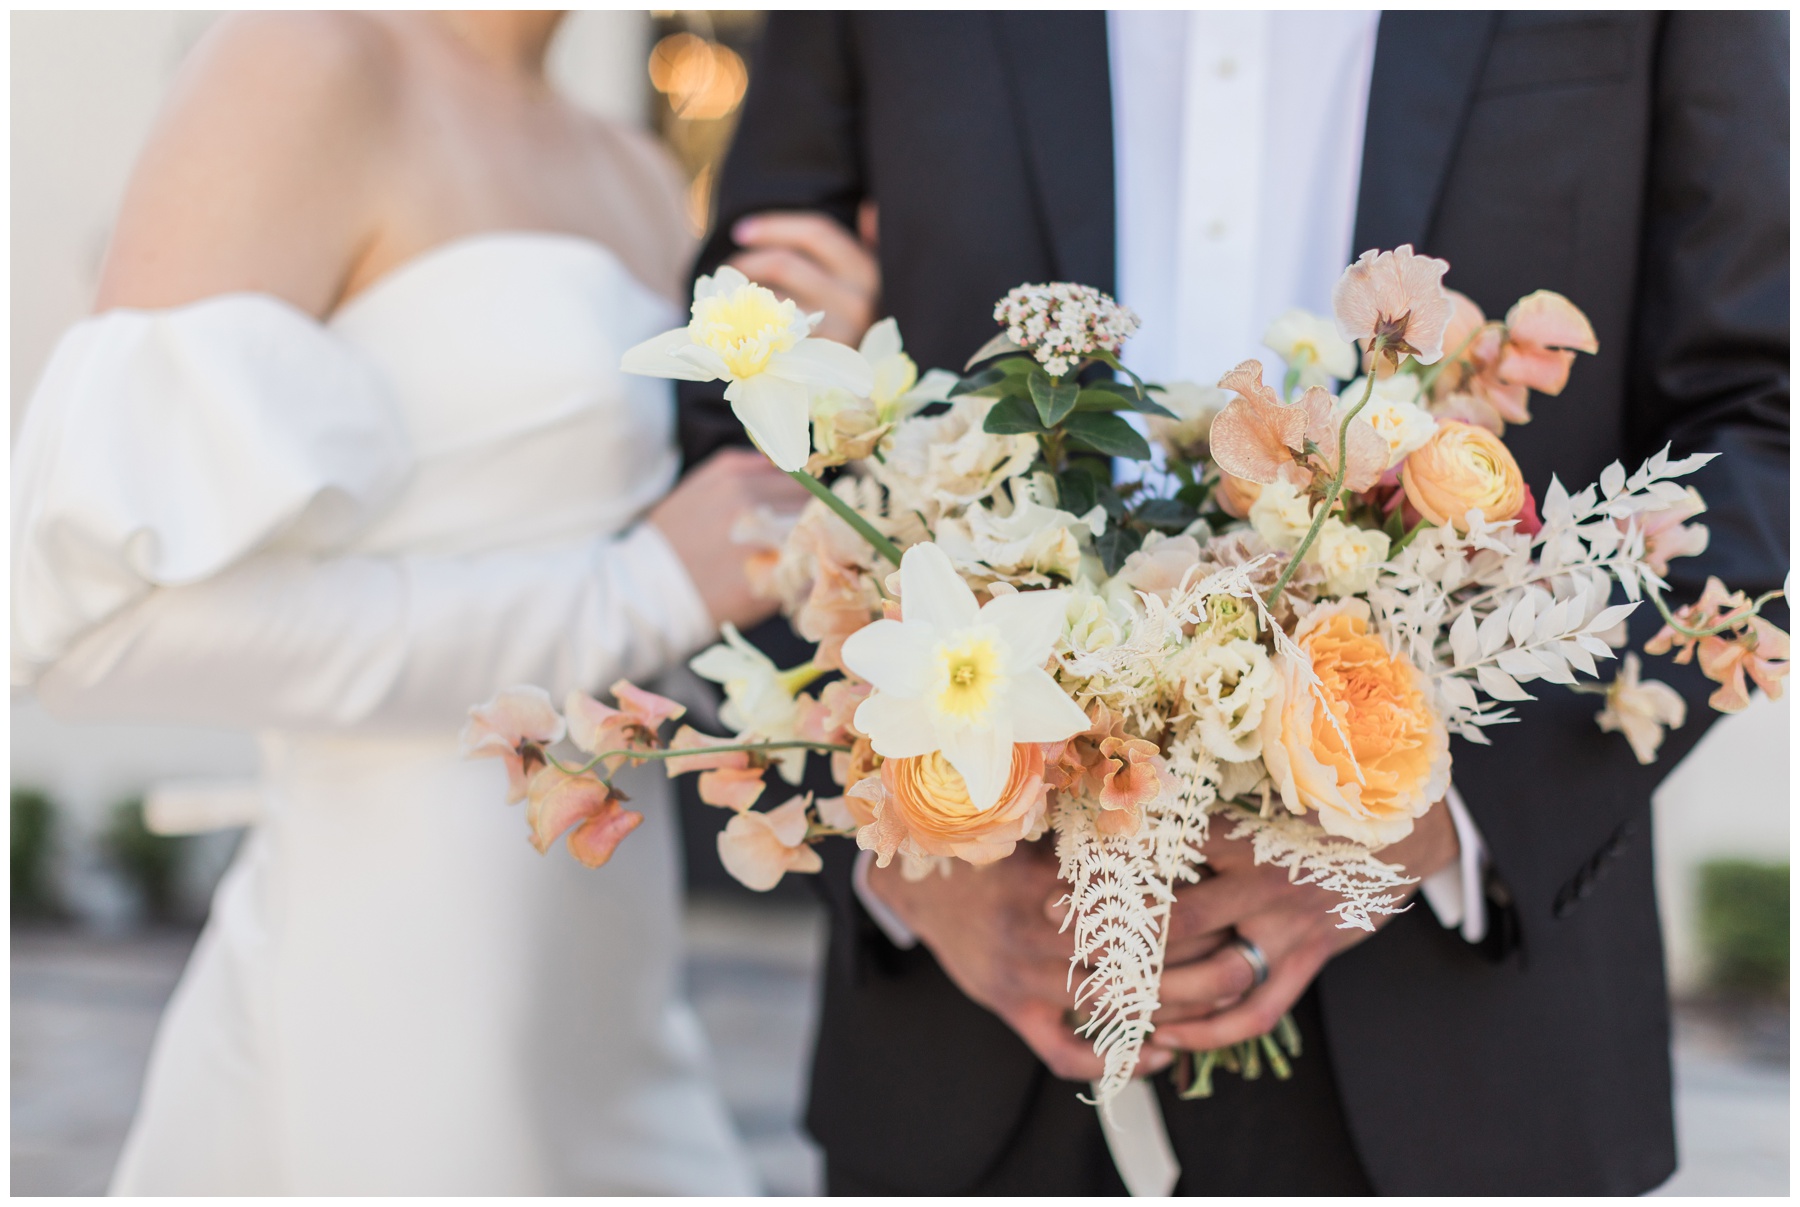 Bridal bouquet filled with pink roses, pink sweet pea, and peach ranunculus by Blush Floral Co.